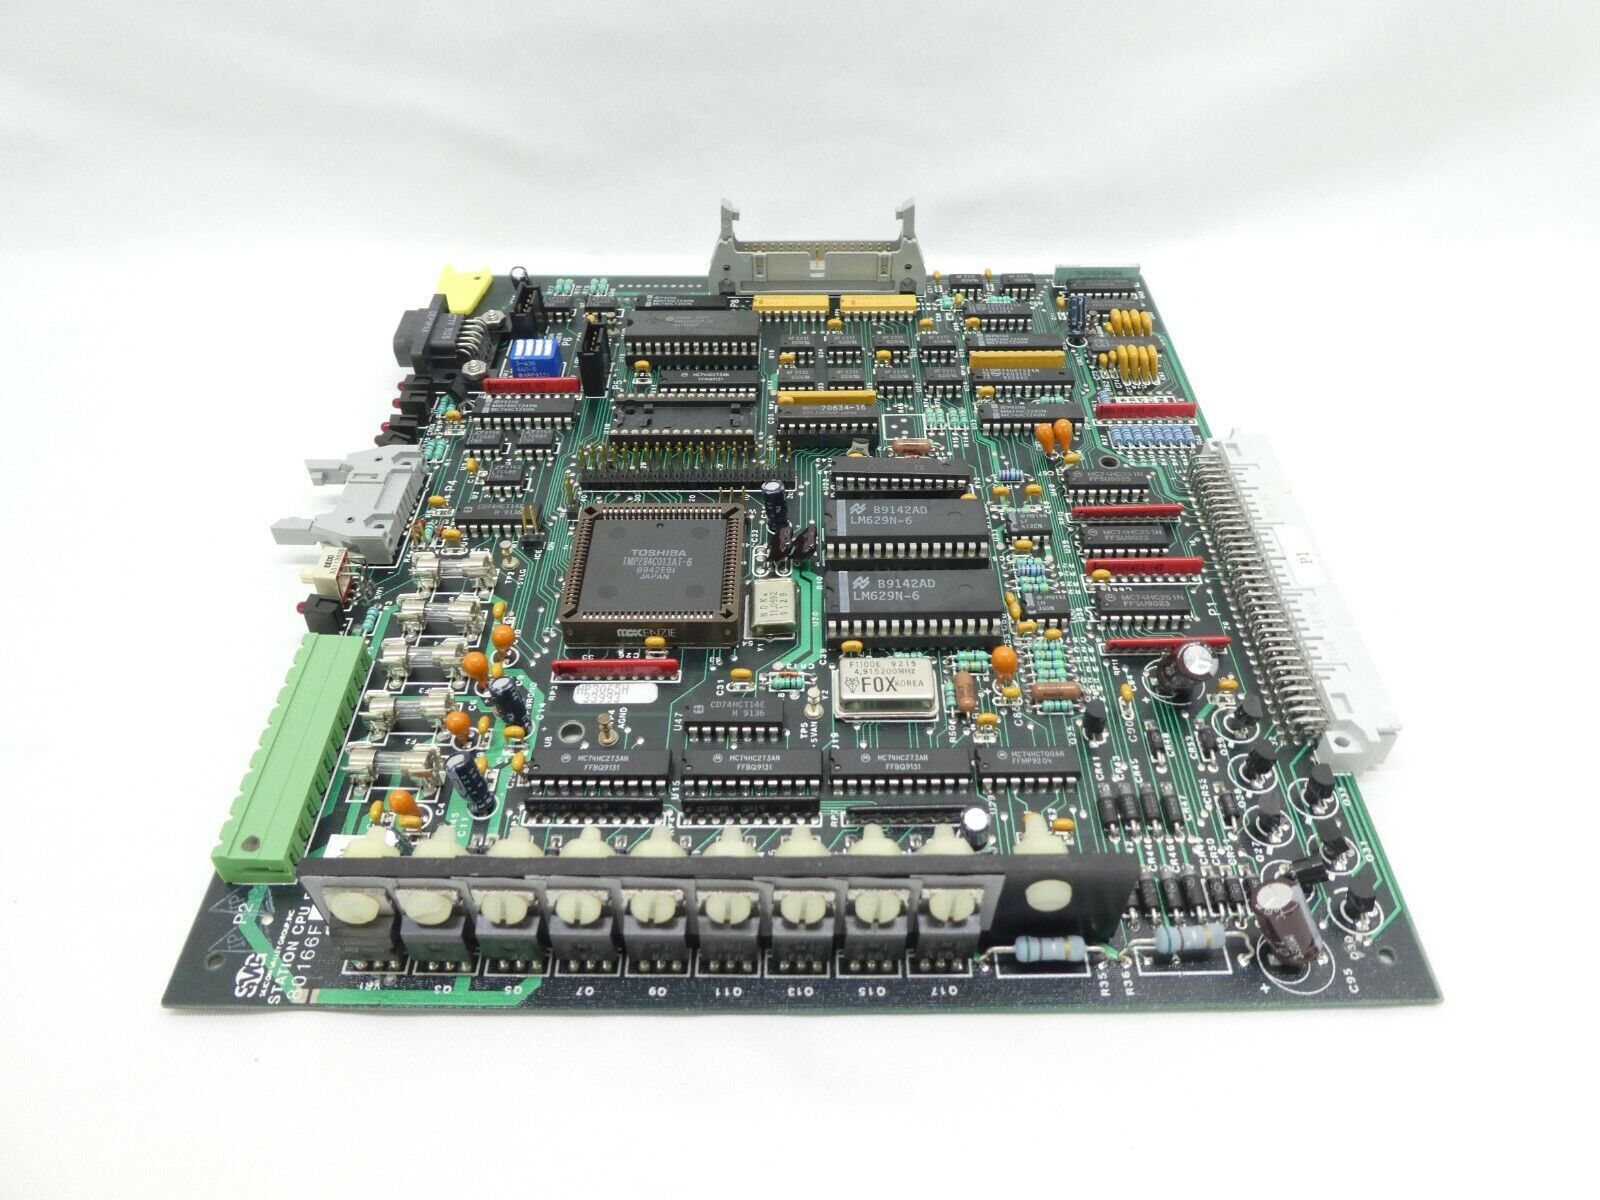 SVG Silicon Valley Group 80166F2-01 Station CPU Board PCB Working Surplus